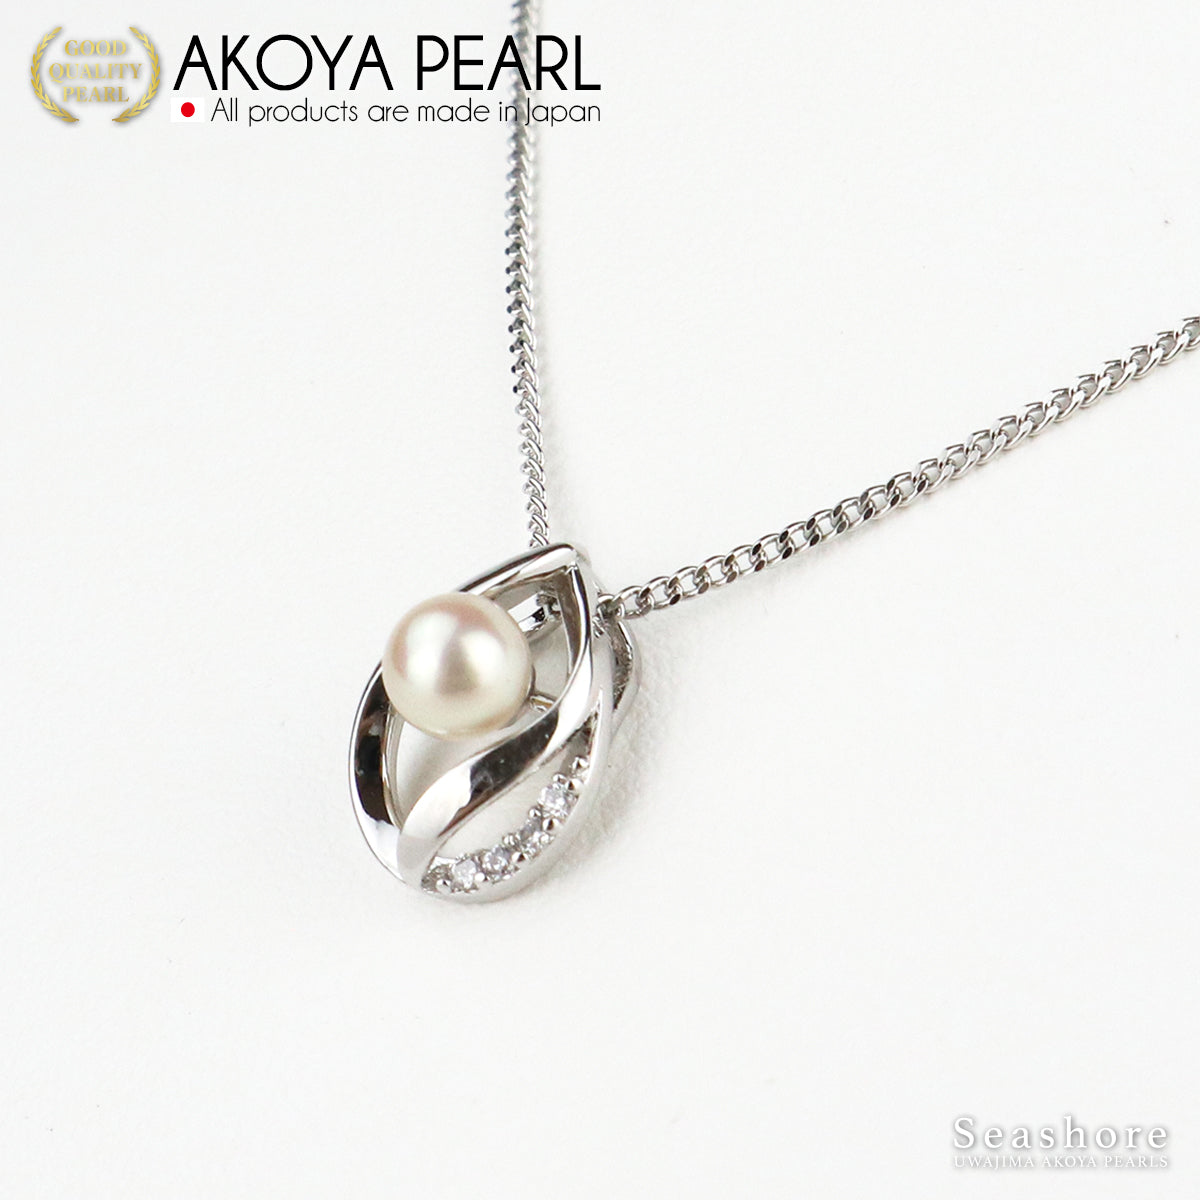 Akoya Pearl Single Pendant Drop White [5.0-5.5mm] Necklace SV925 Platinum Finish Pearl Necklace (3842)